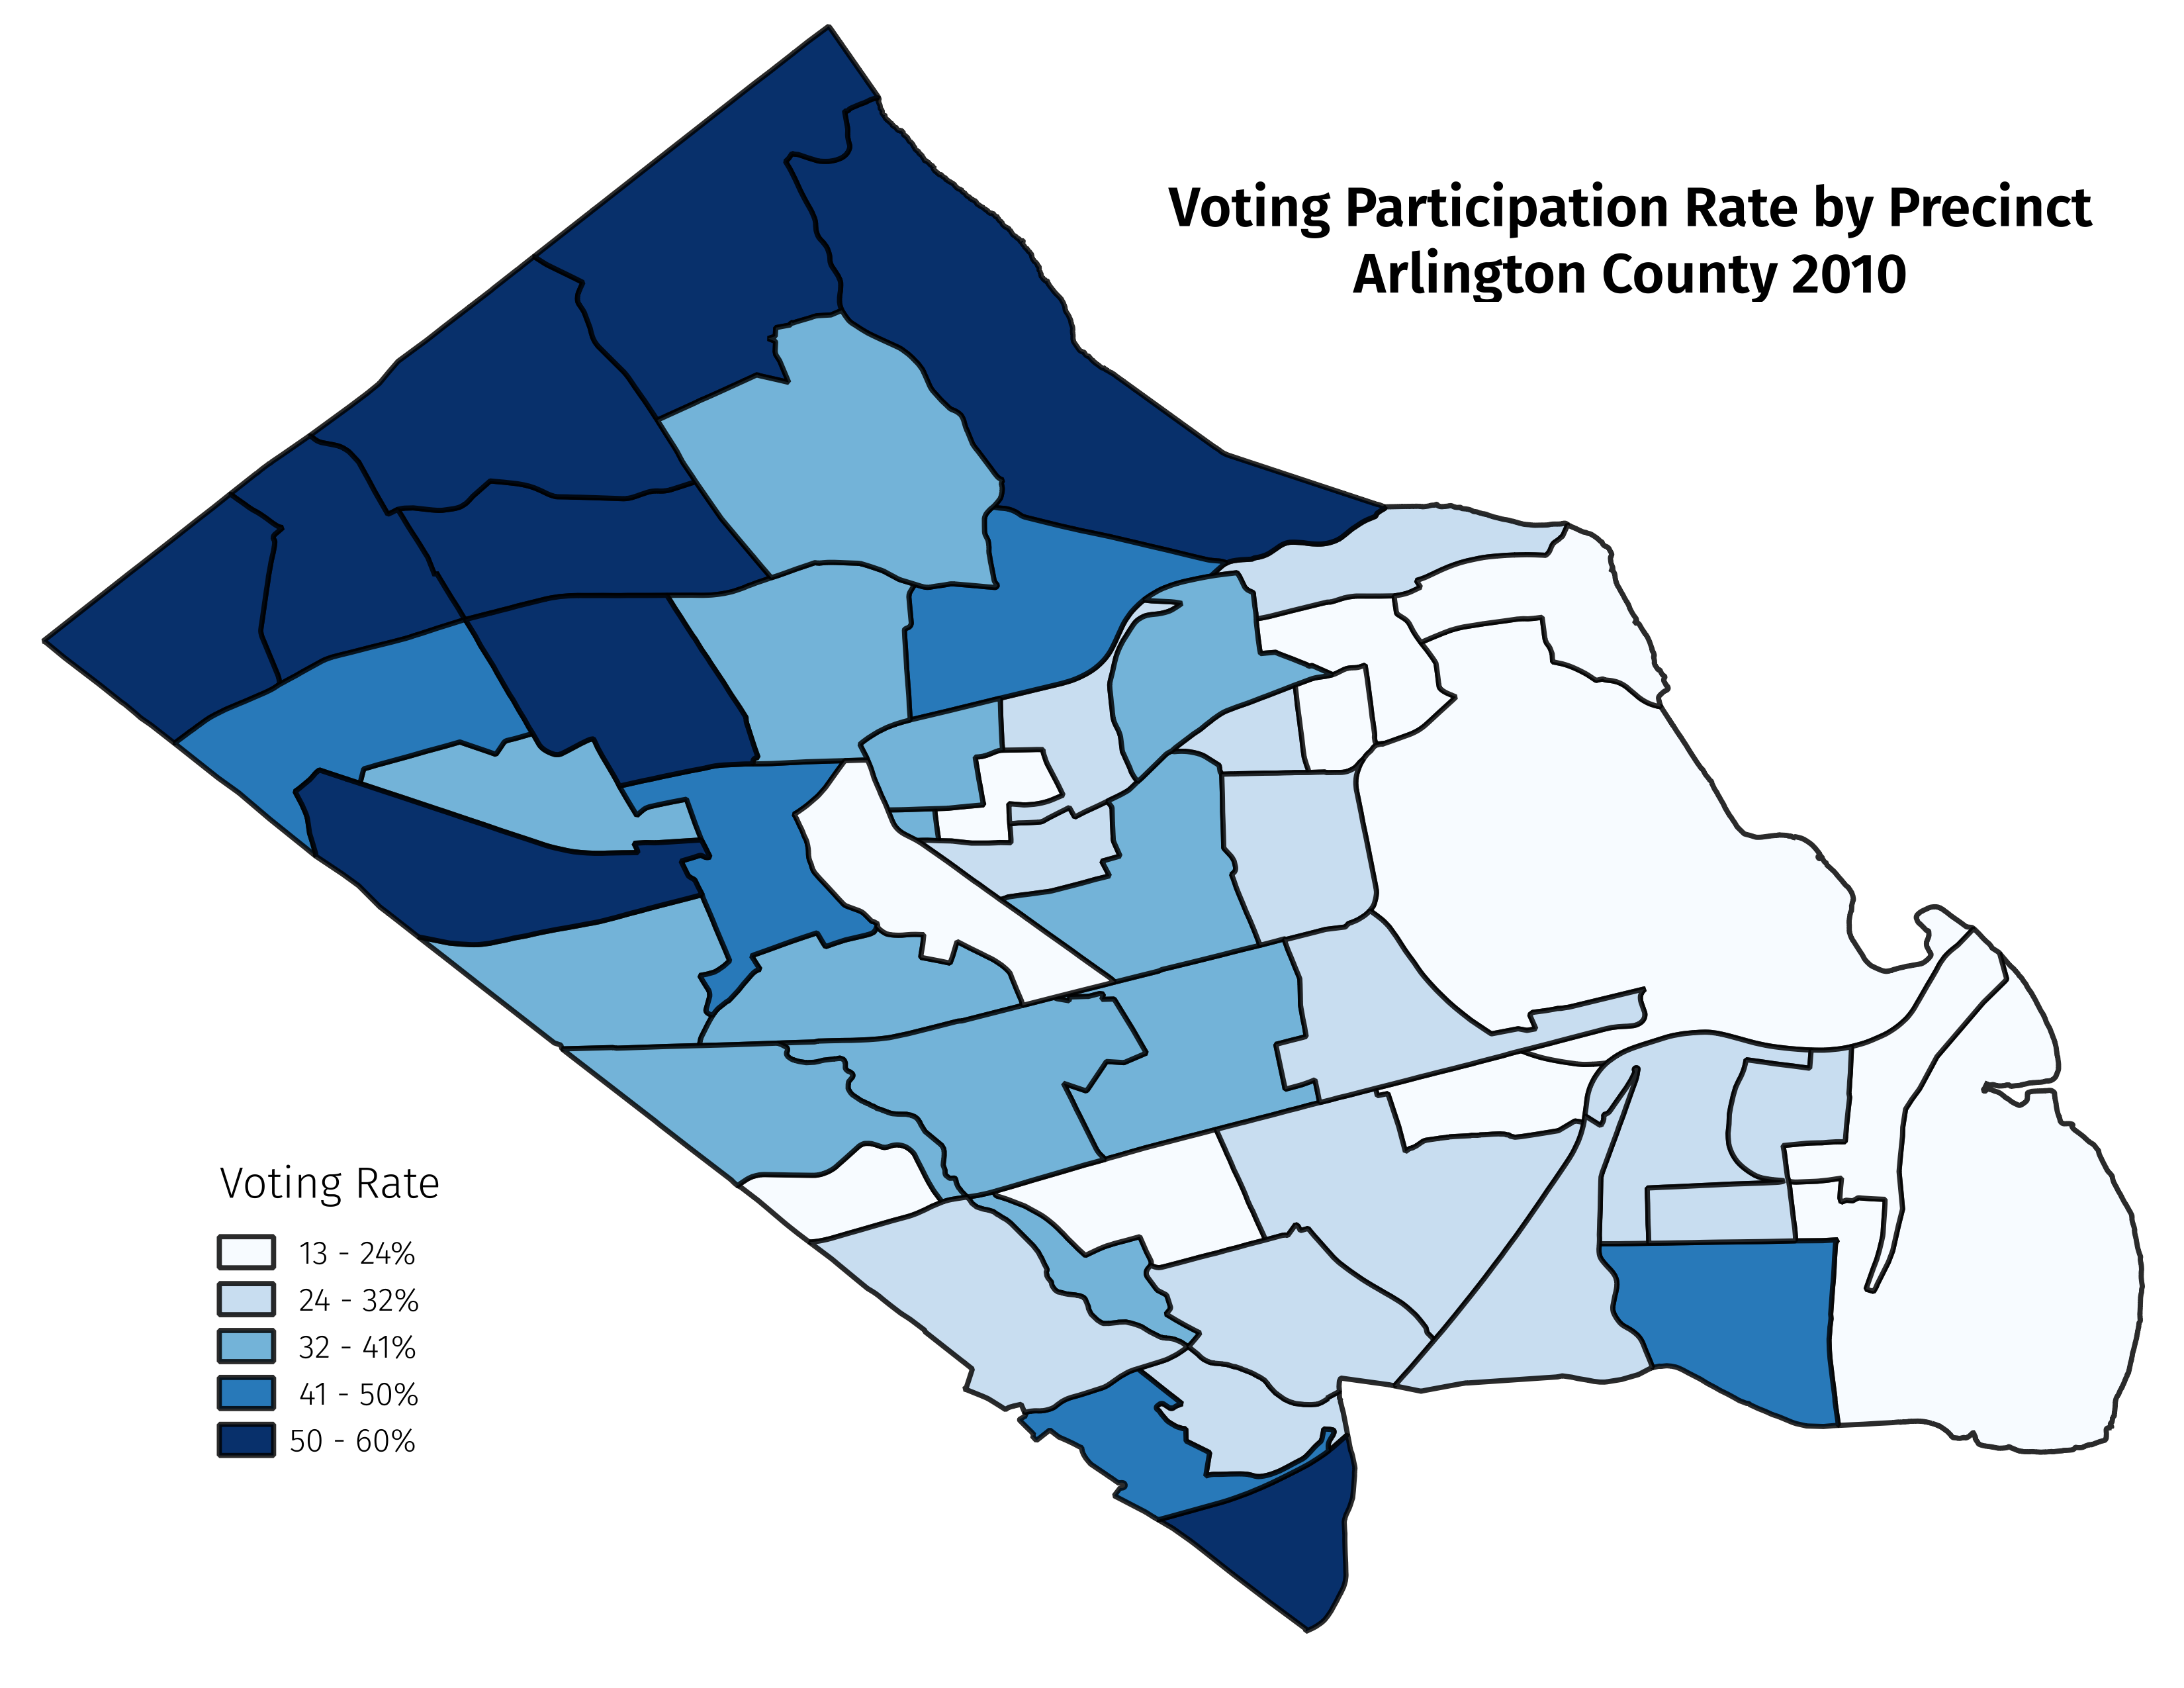 Choropleth Voting Rate Map